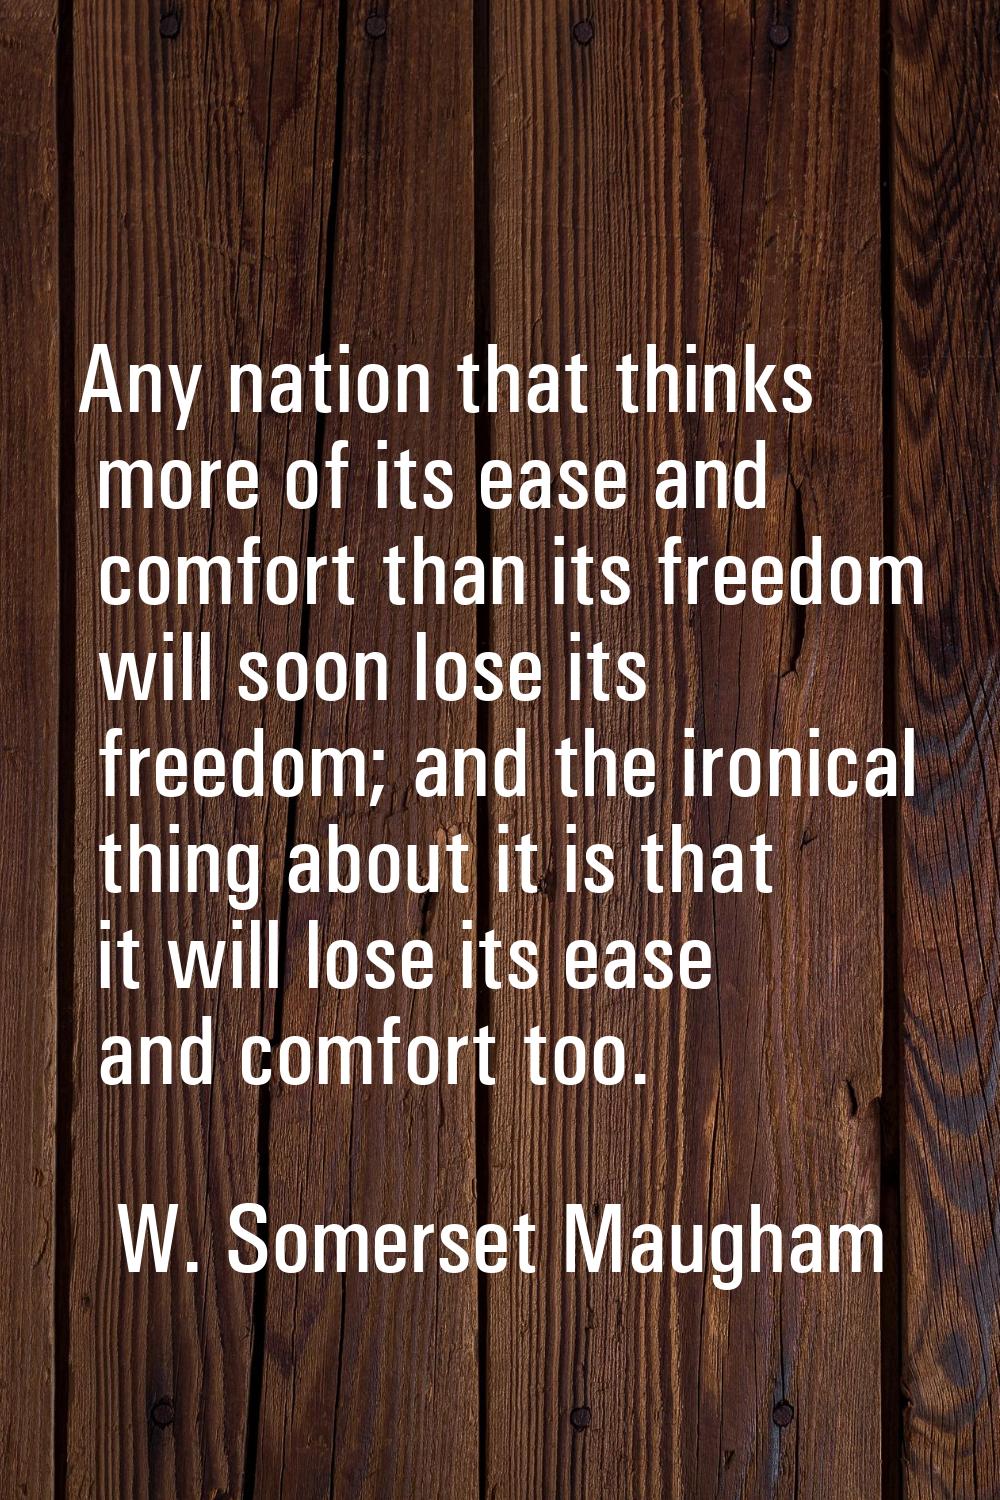 Any nation that thinks more of its ease and comfort than its freedom will soon lose its freedom; an